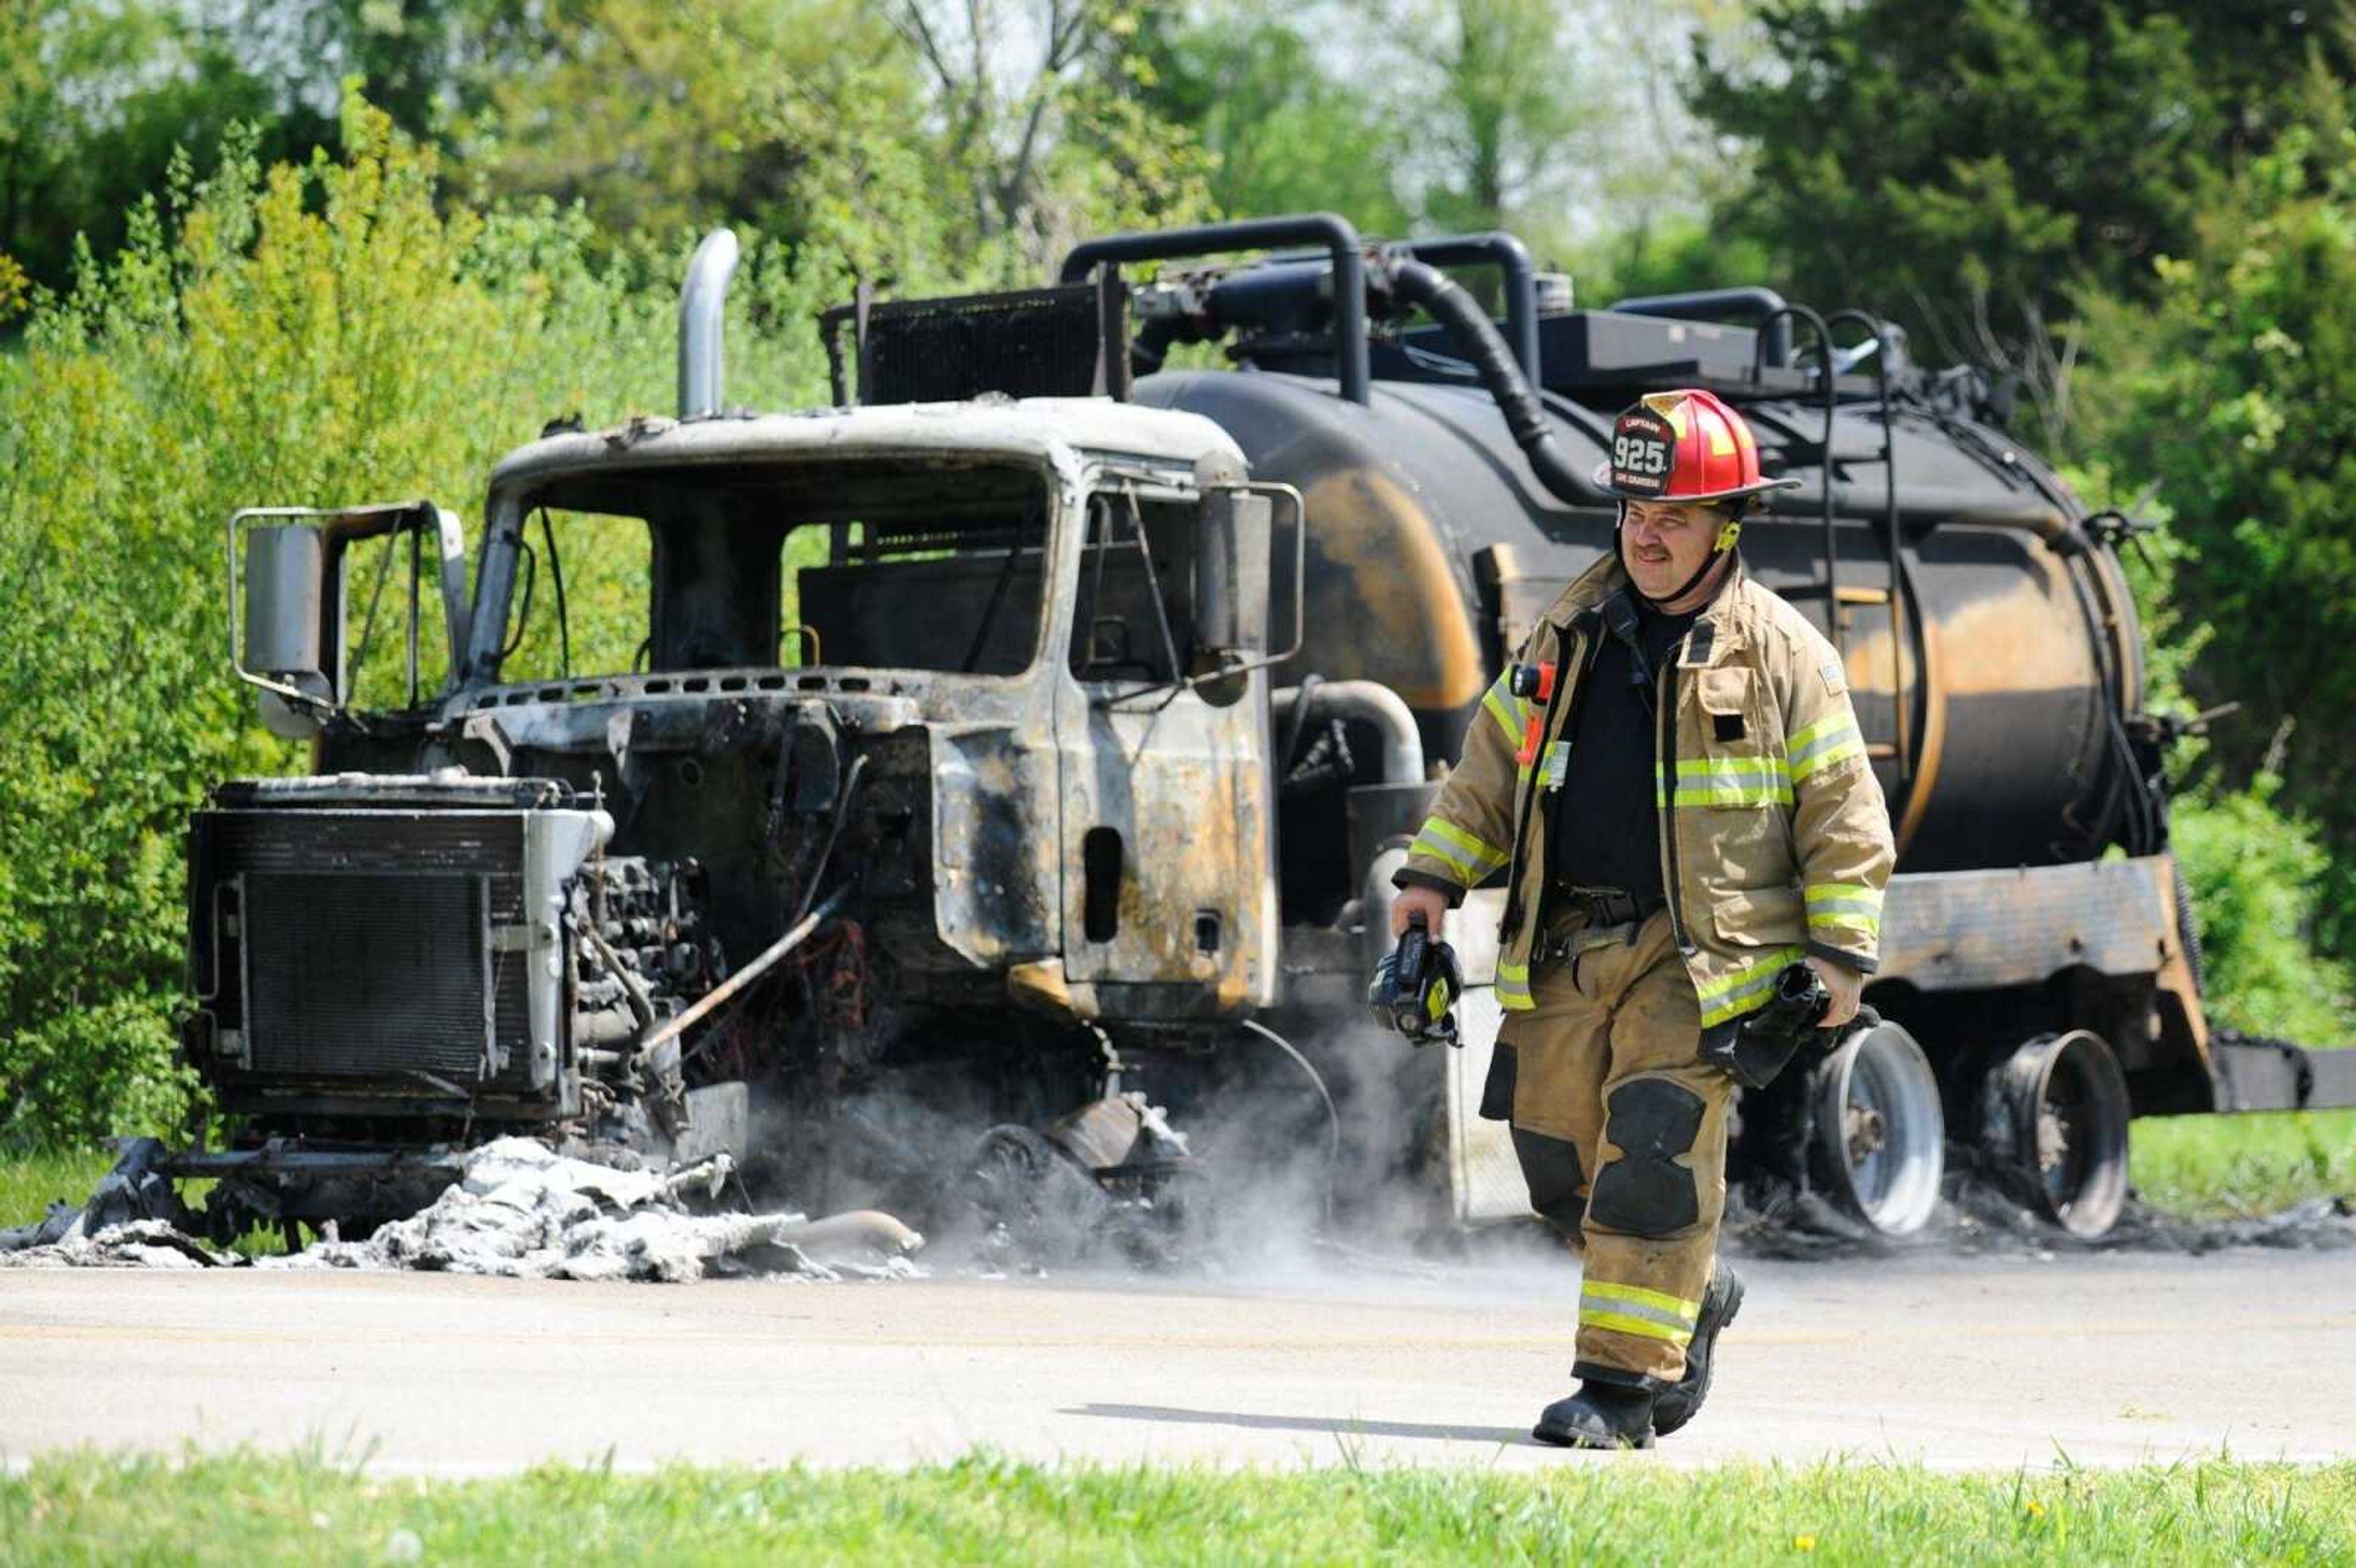 A member of the Cape Girardeau Fire Department walks past the charred remains of a truck involved in an accident on Highway E near Oak Ridge, Missouri Friday, April 22, 2016. An automobile traveling east, crossed the center line and collided with a tanker truck headed south, just after 11:00 a.m. Both drivers were transported to Saint Francis Medical Center.